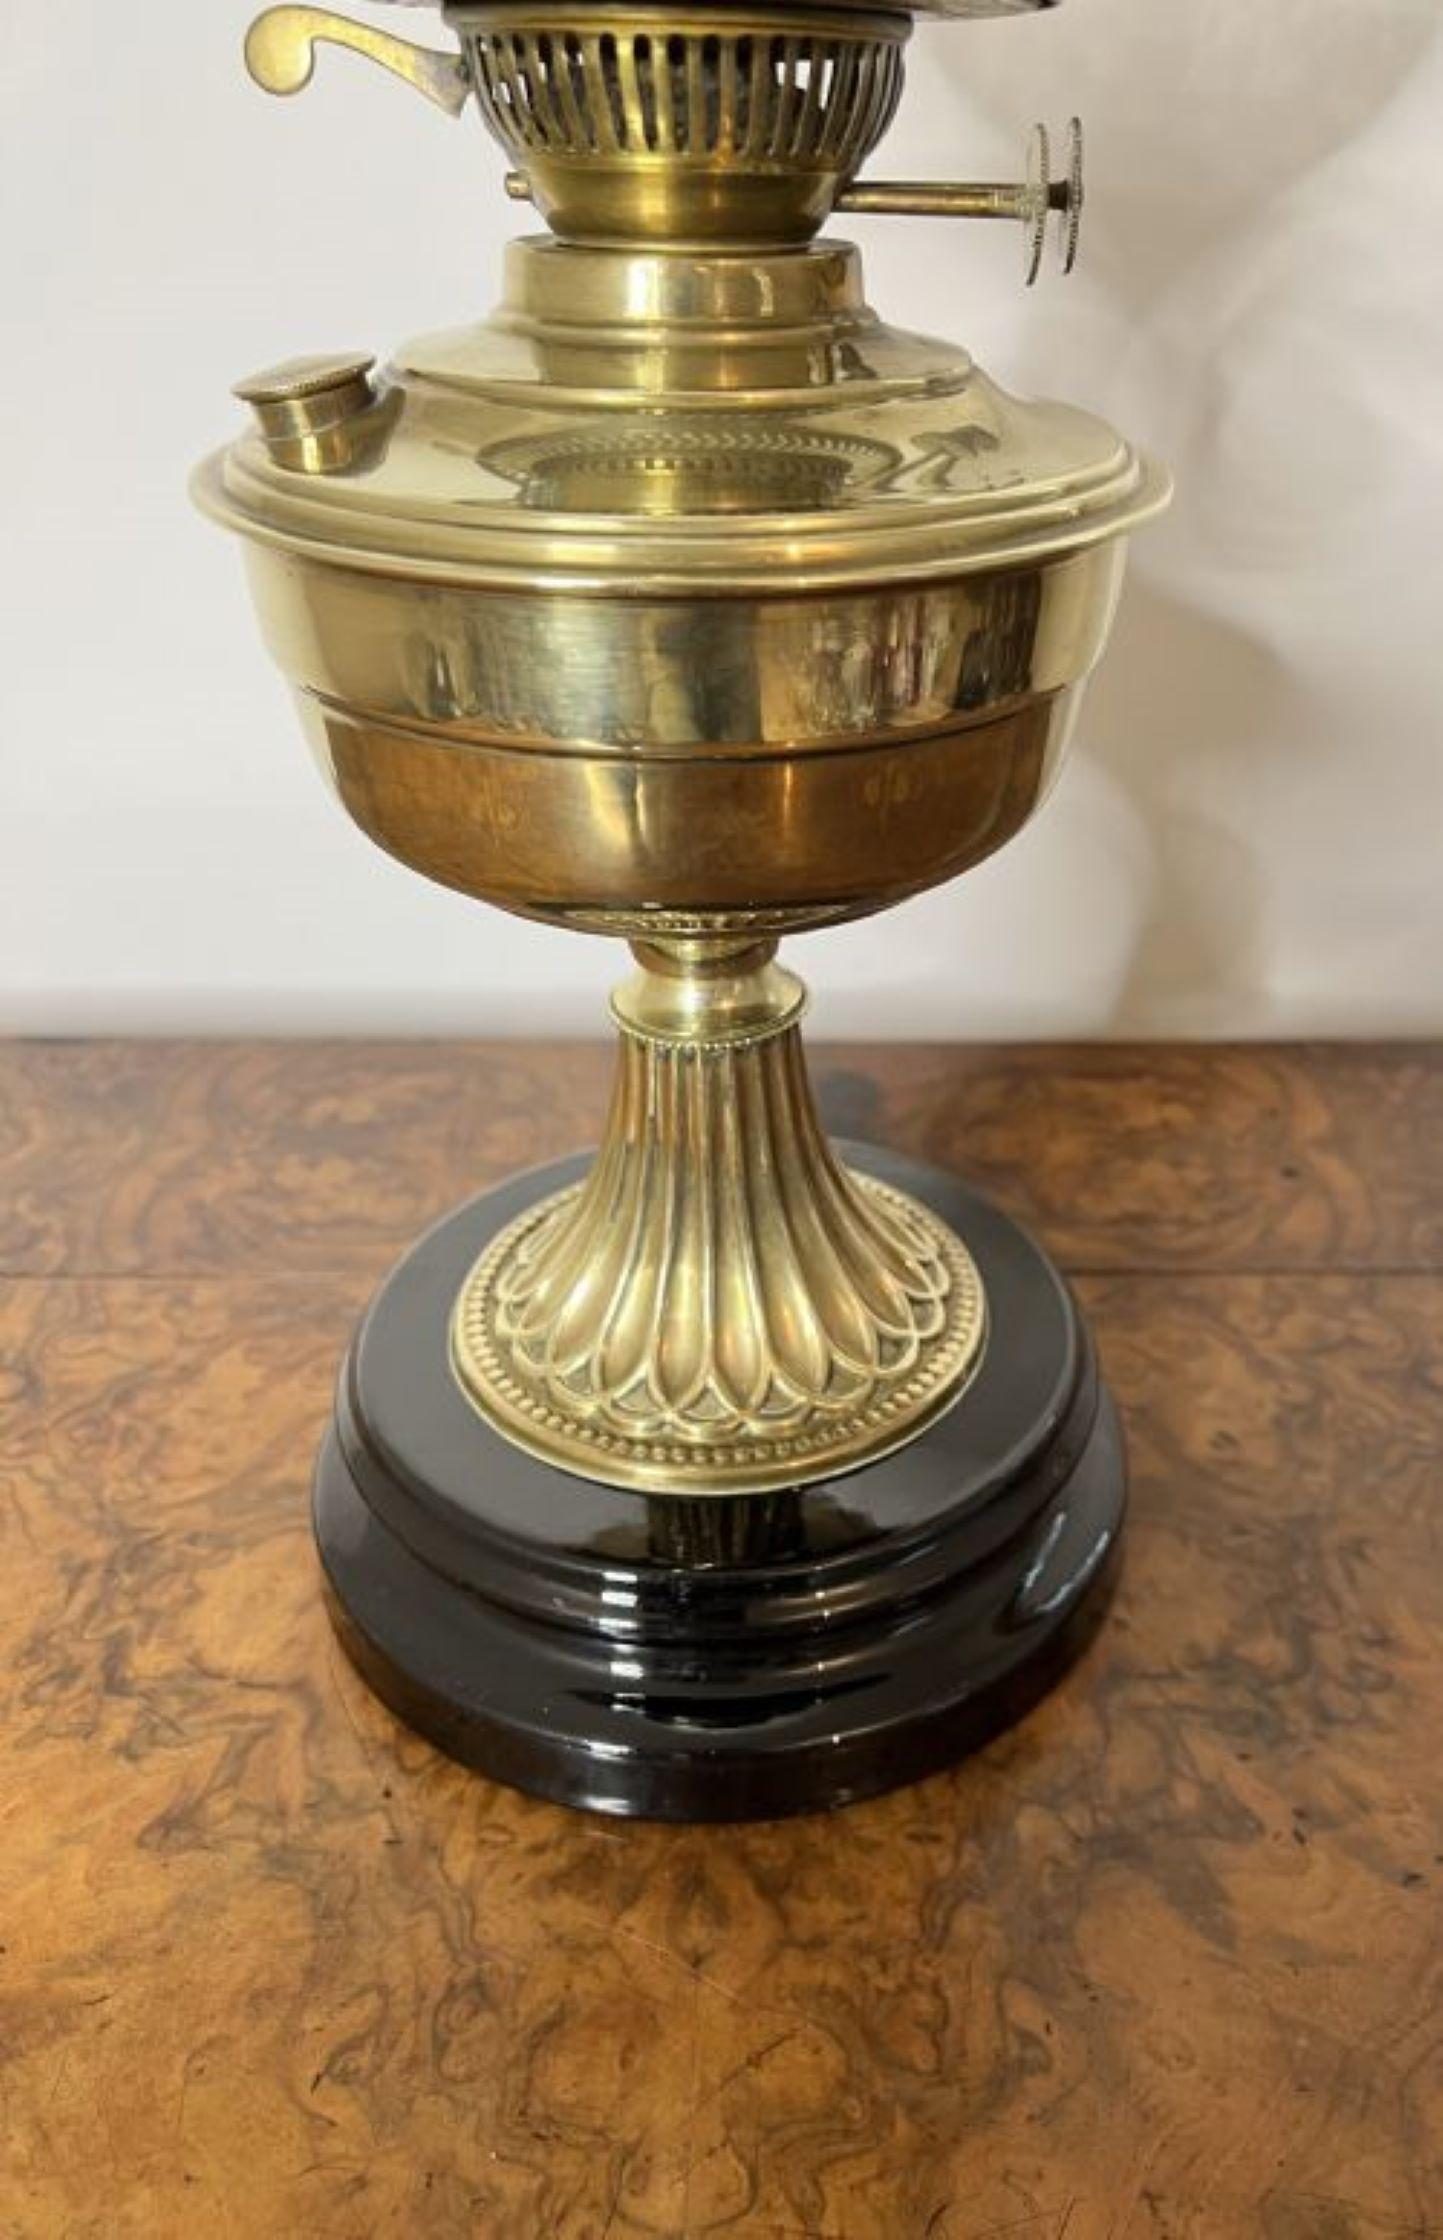 Lovely quality antique Victorian brass oil lamp having a quality Victorian oil lamp with a etched glass globe shade, glass chimney, double burner and a brass column standing on a circular base.